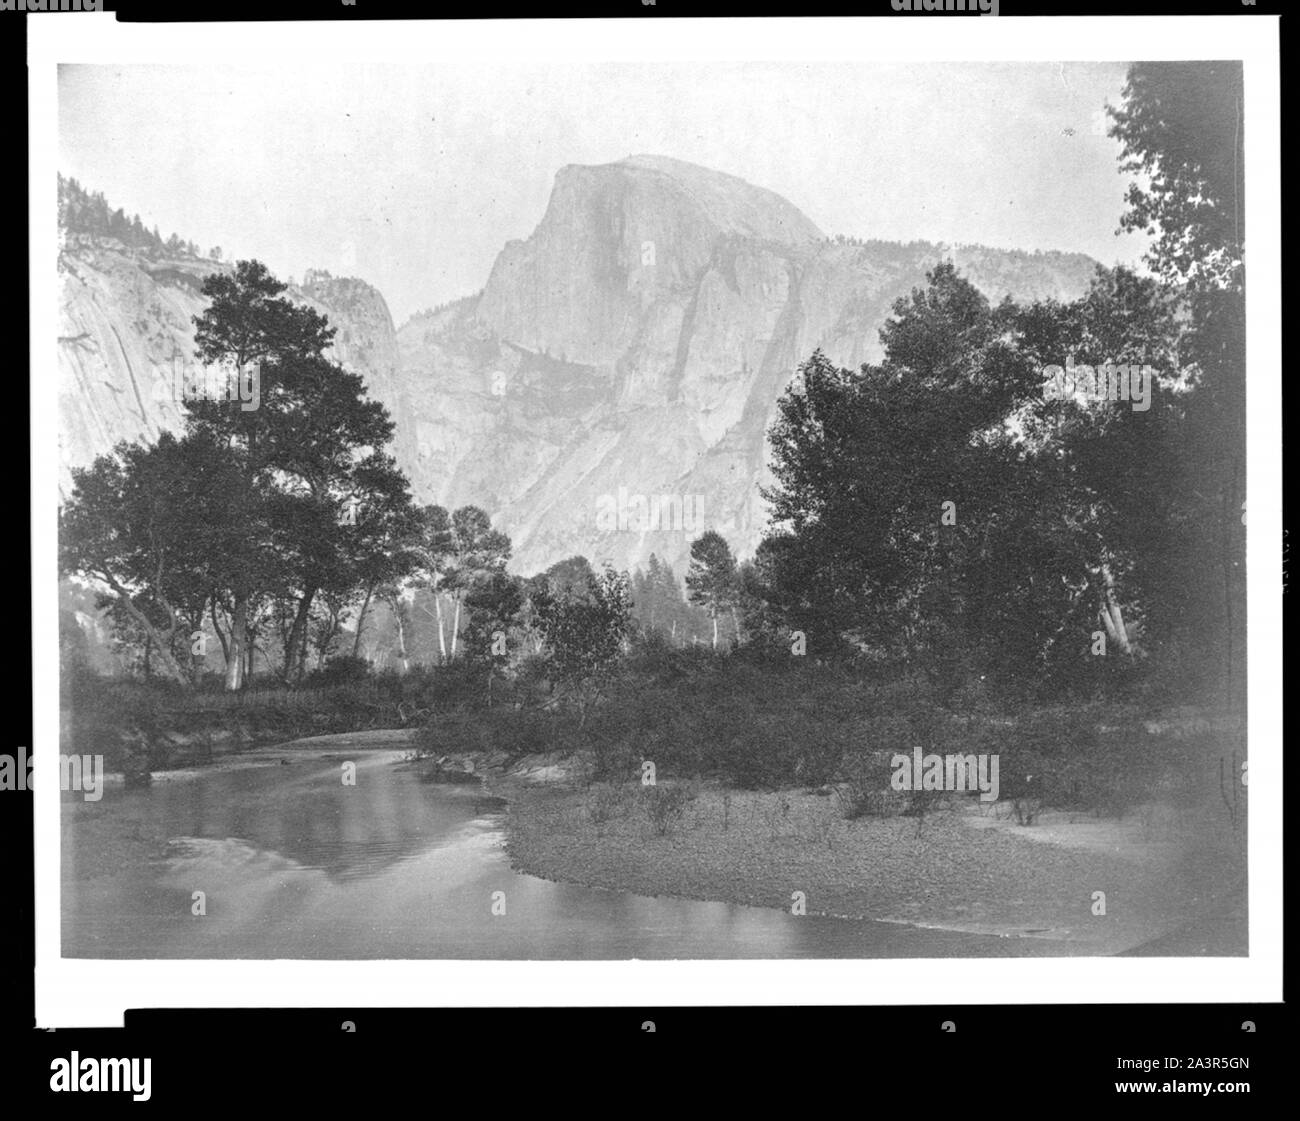 Stream with trees and mountains in background, Yosemite National Park, Calif. Stock Photo